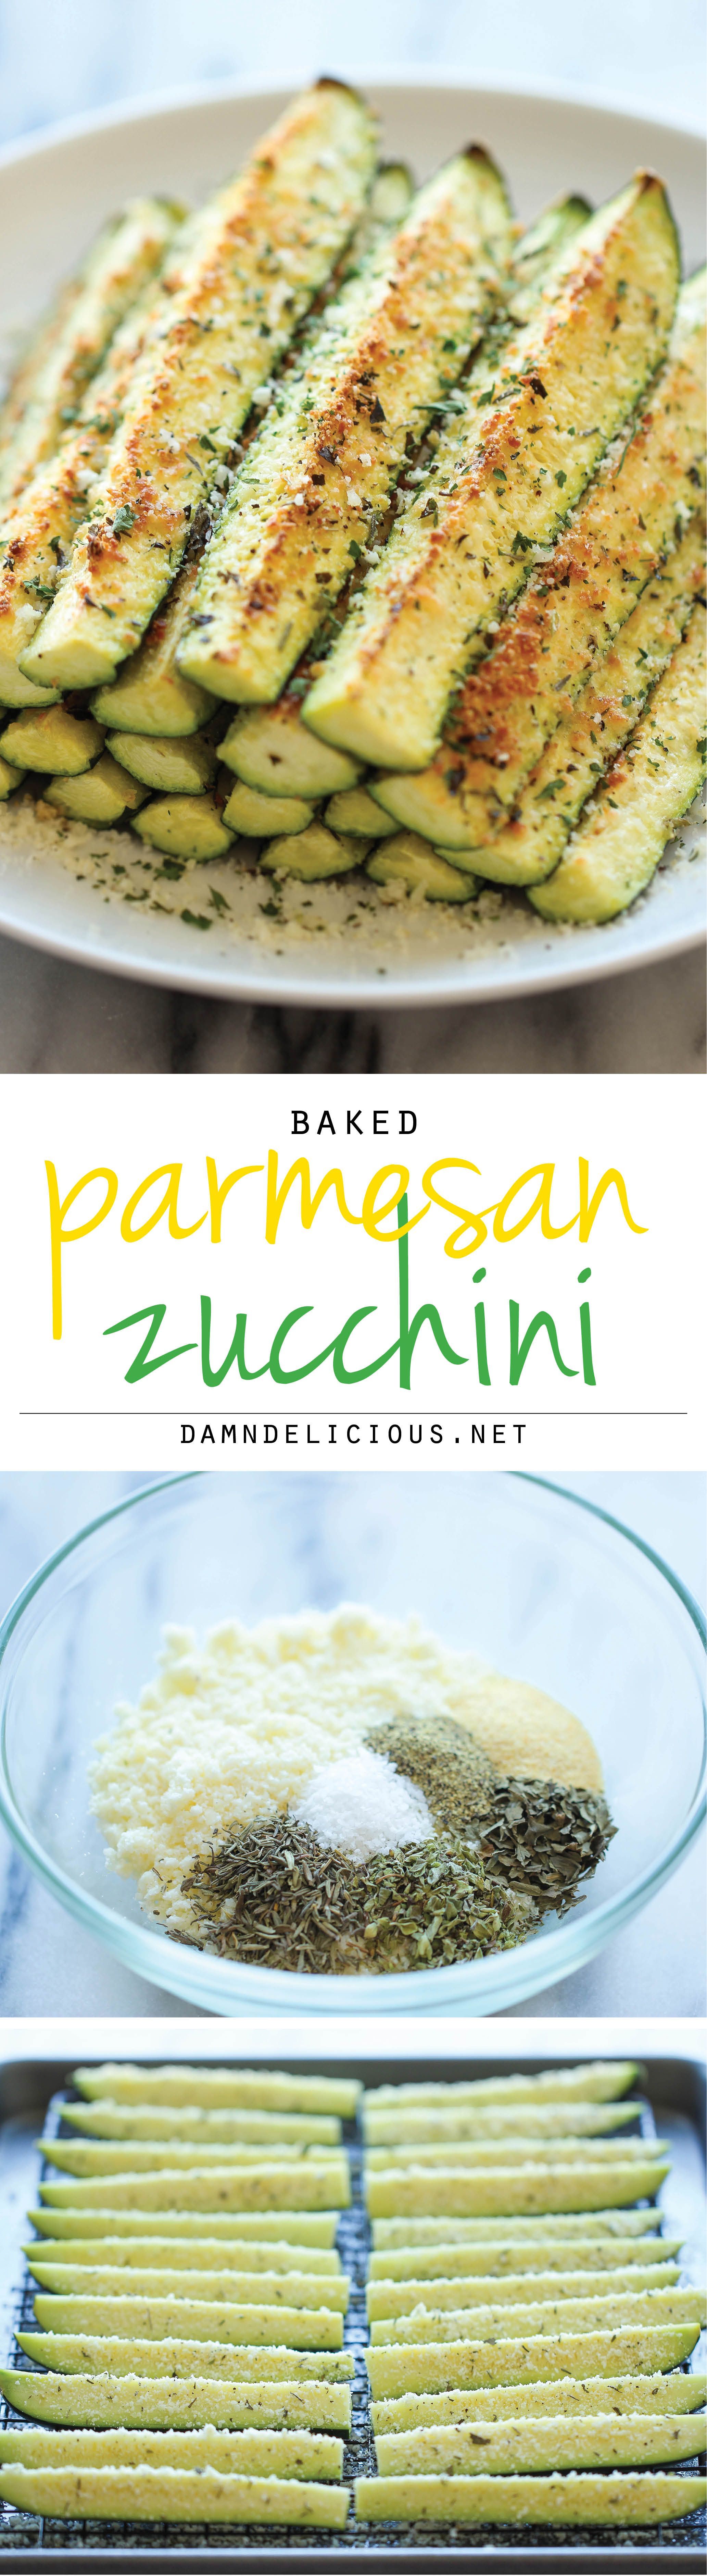 Baked Parmesan Zucchini – Crisp, tender zucchini sticks oven-roasted to perfection. Its healthy,